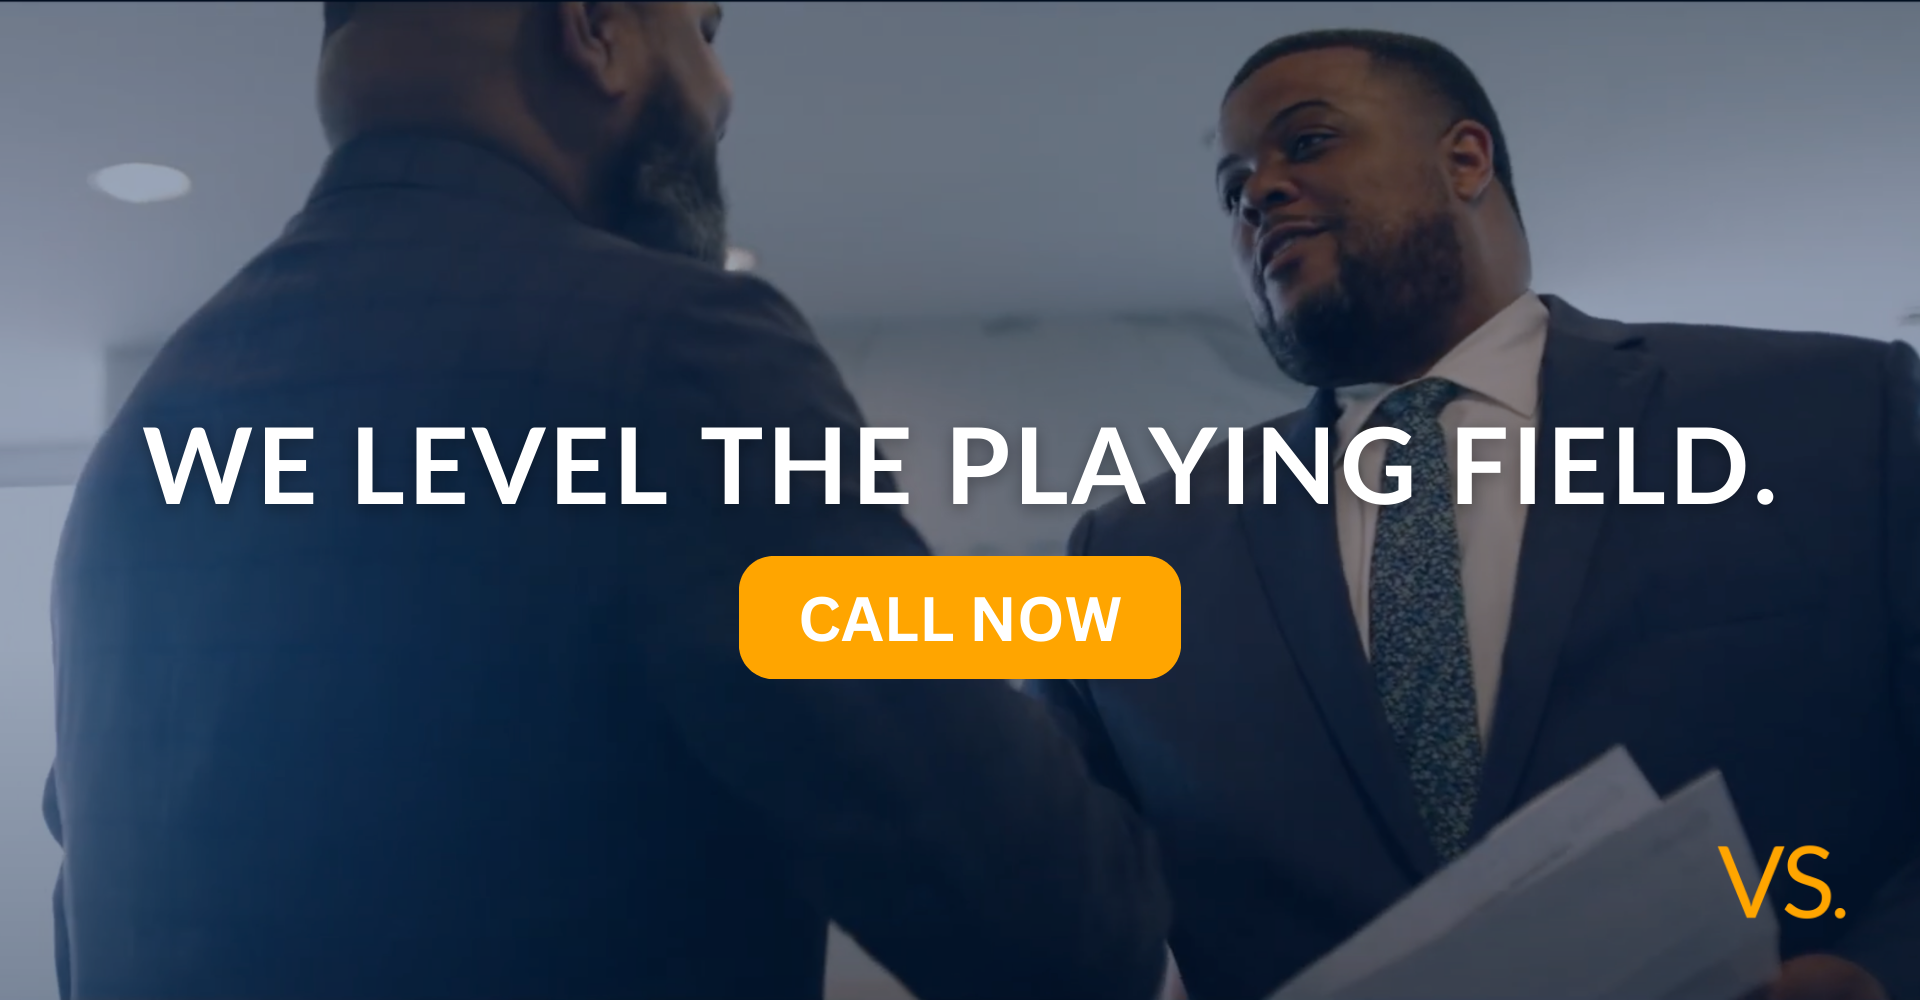 We are lawyers who level the playing field. Don't give the other side an unfair advantage.